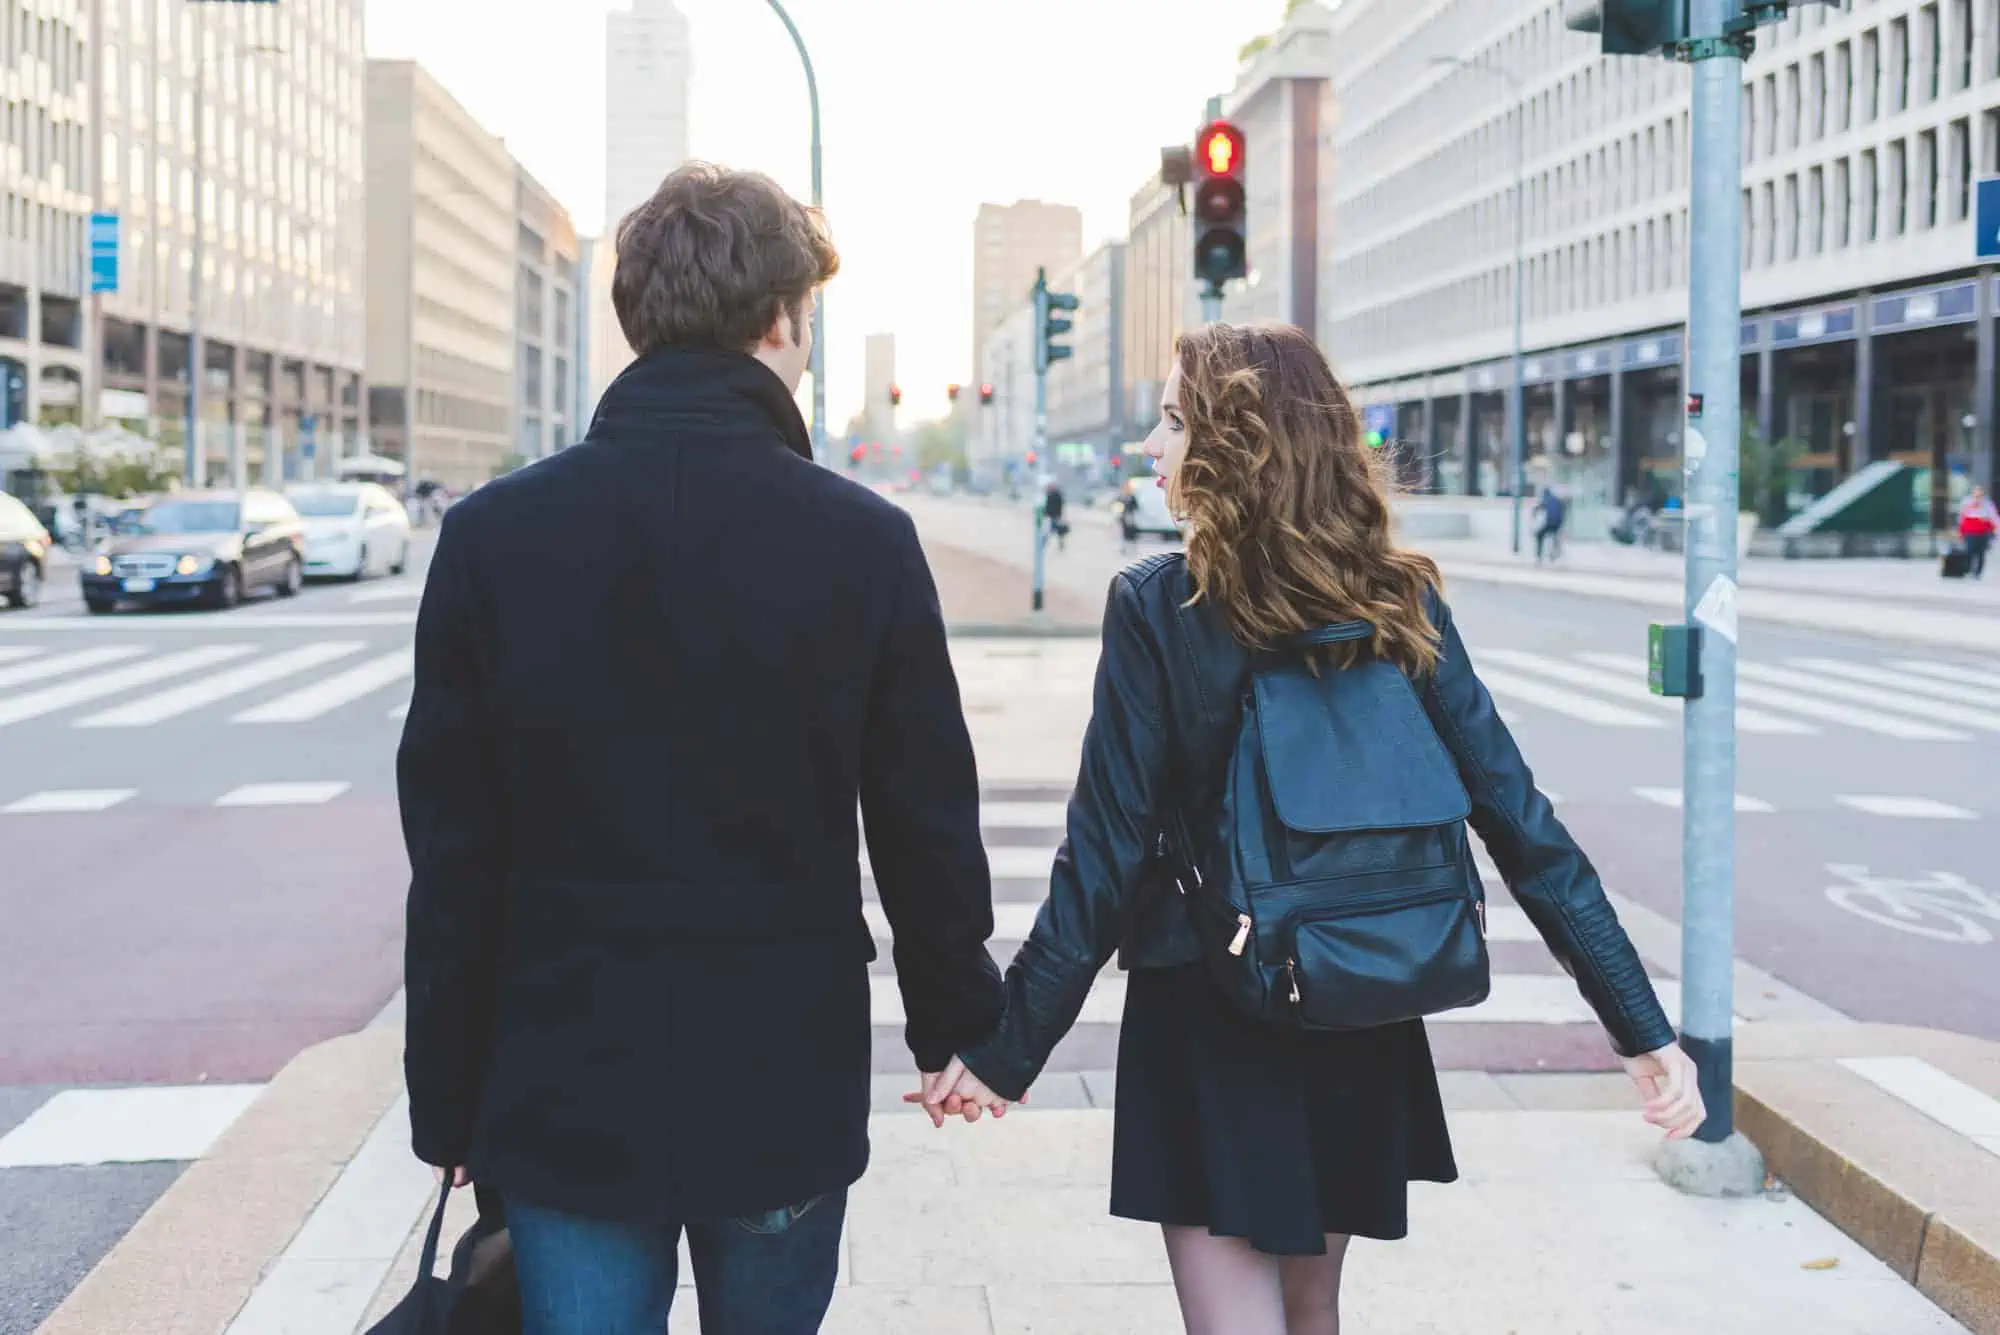 A man and a woman walking down a street holding hands